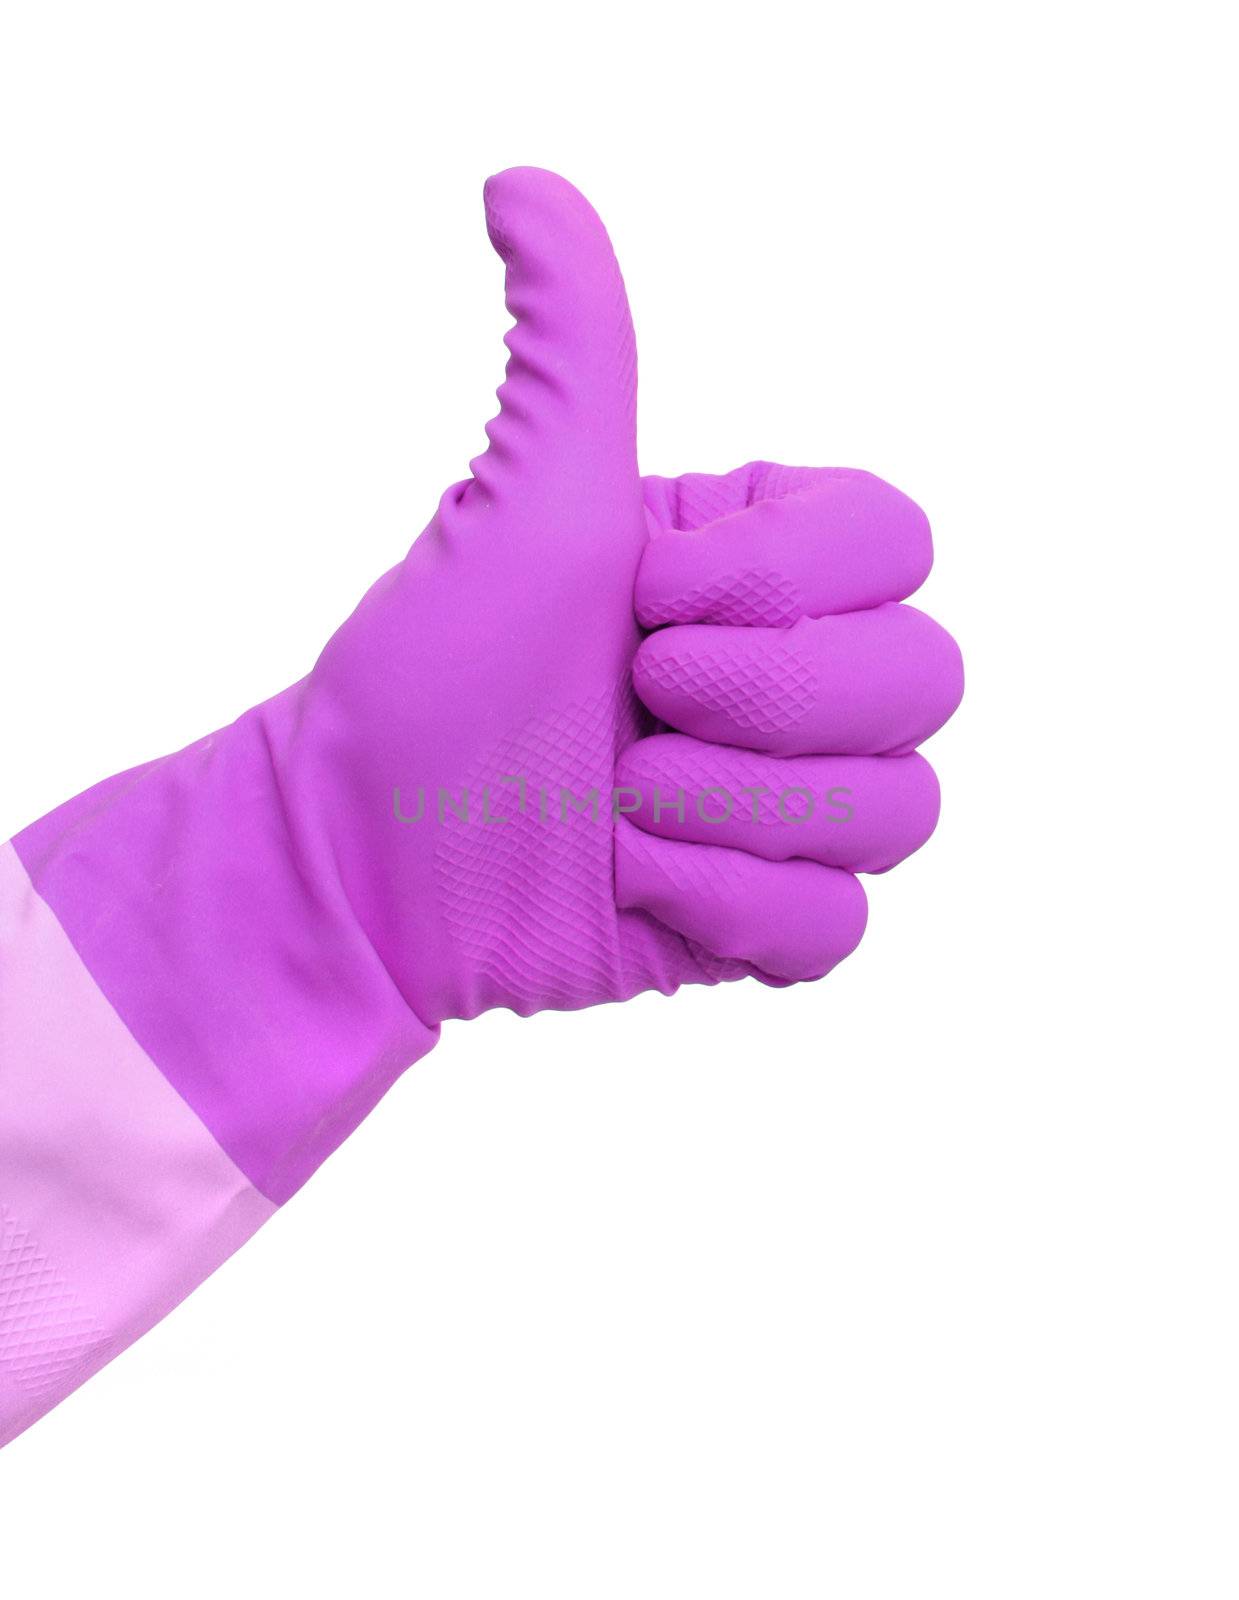 Cleaning thumbs up